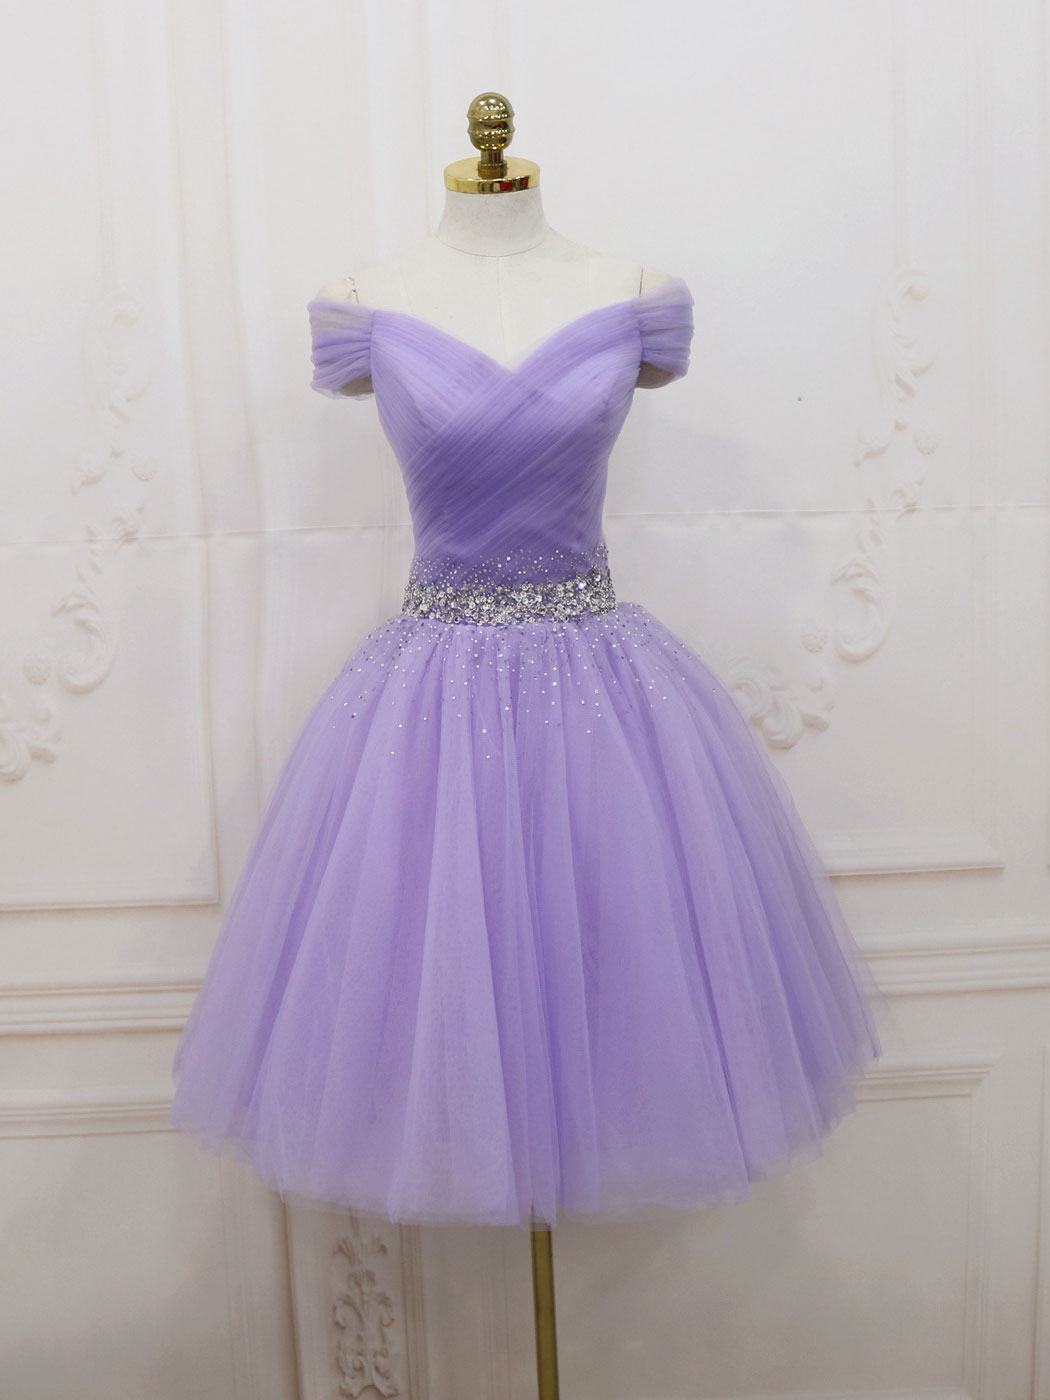 Purple Off Shoulder Tulle Sequin Corset Prom Dress Purple Puffy Corset Homecoming Dress outfit, Evenning Dresses Short